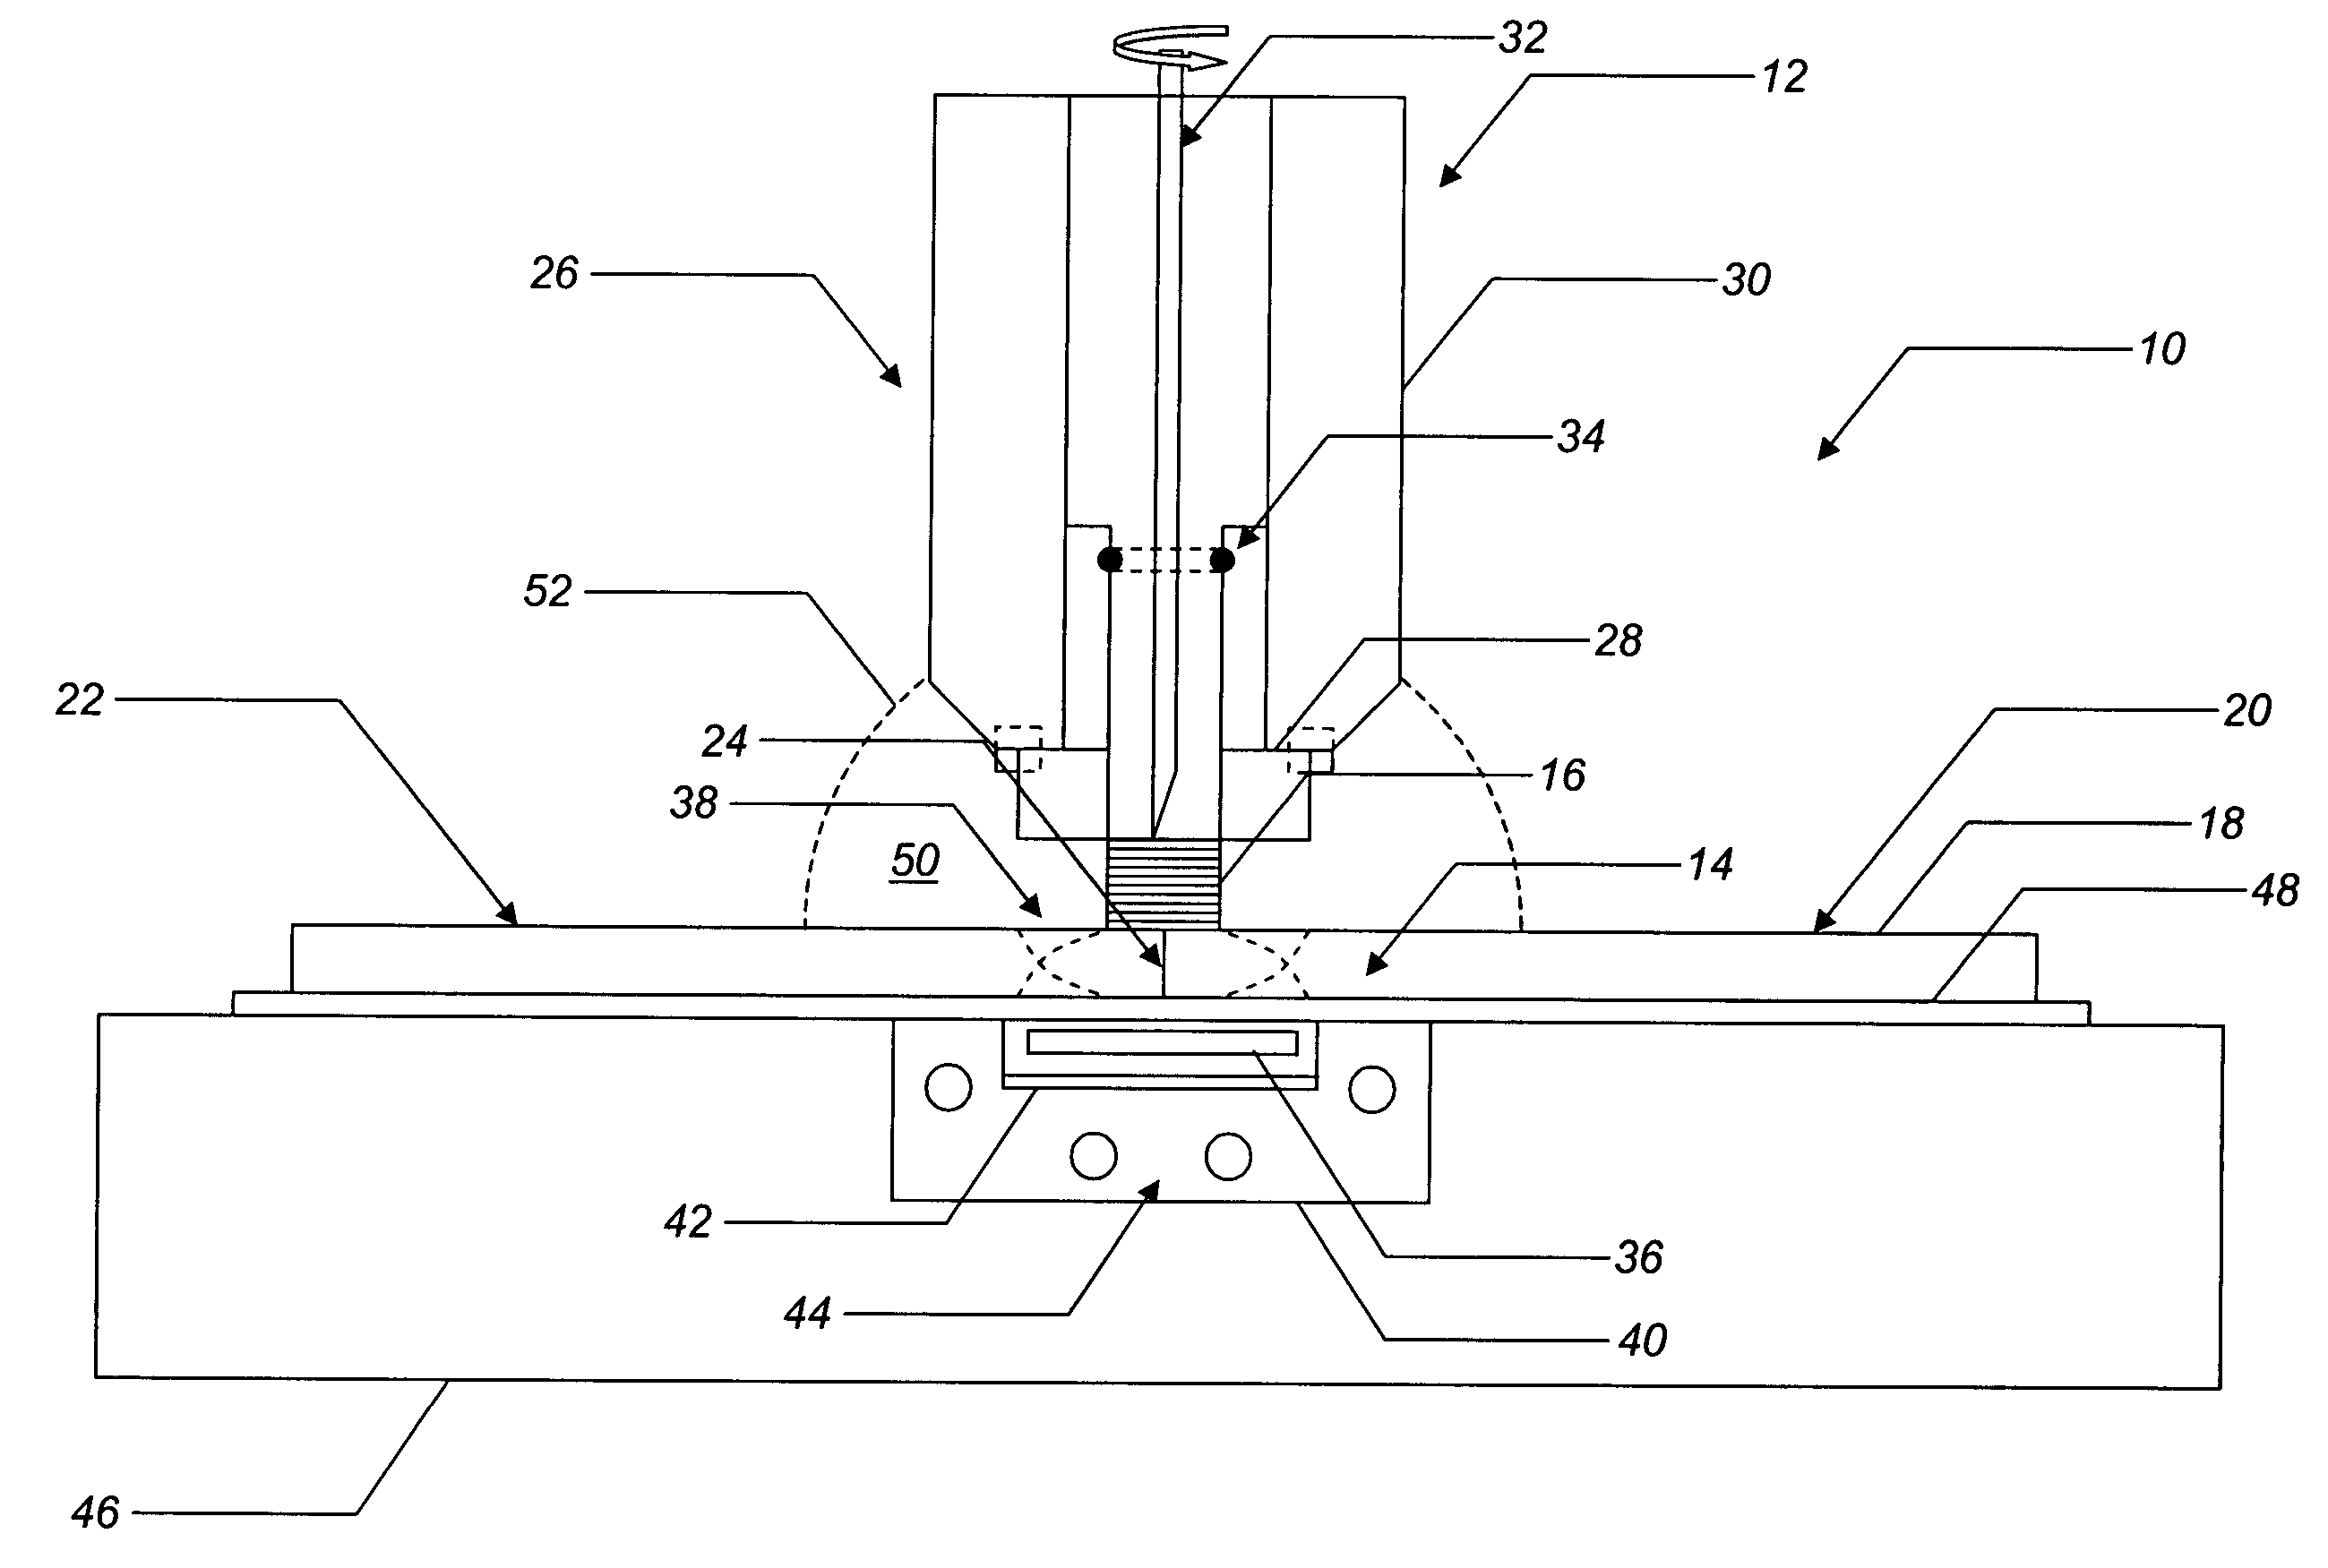 Friction stir welding apparatus and associated thermal management systems and methods